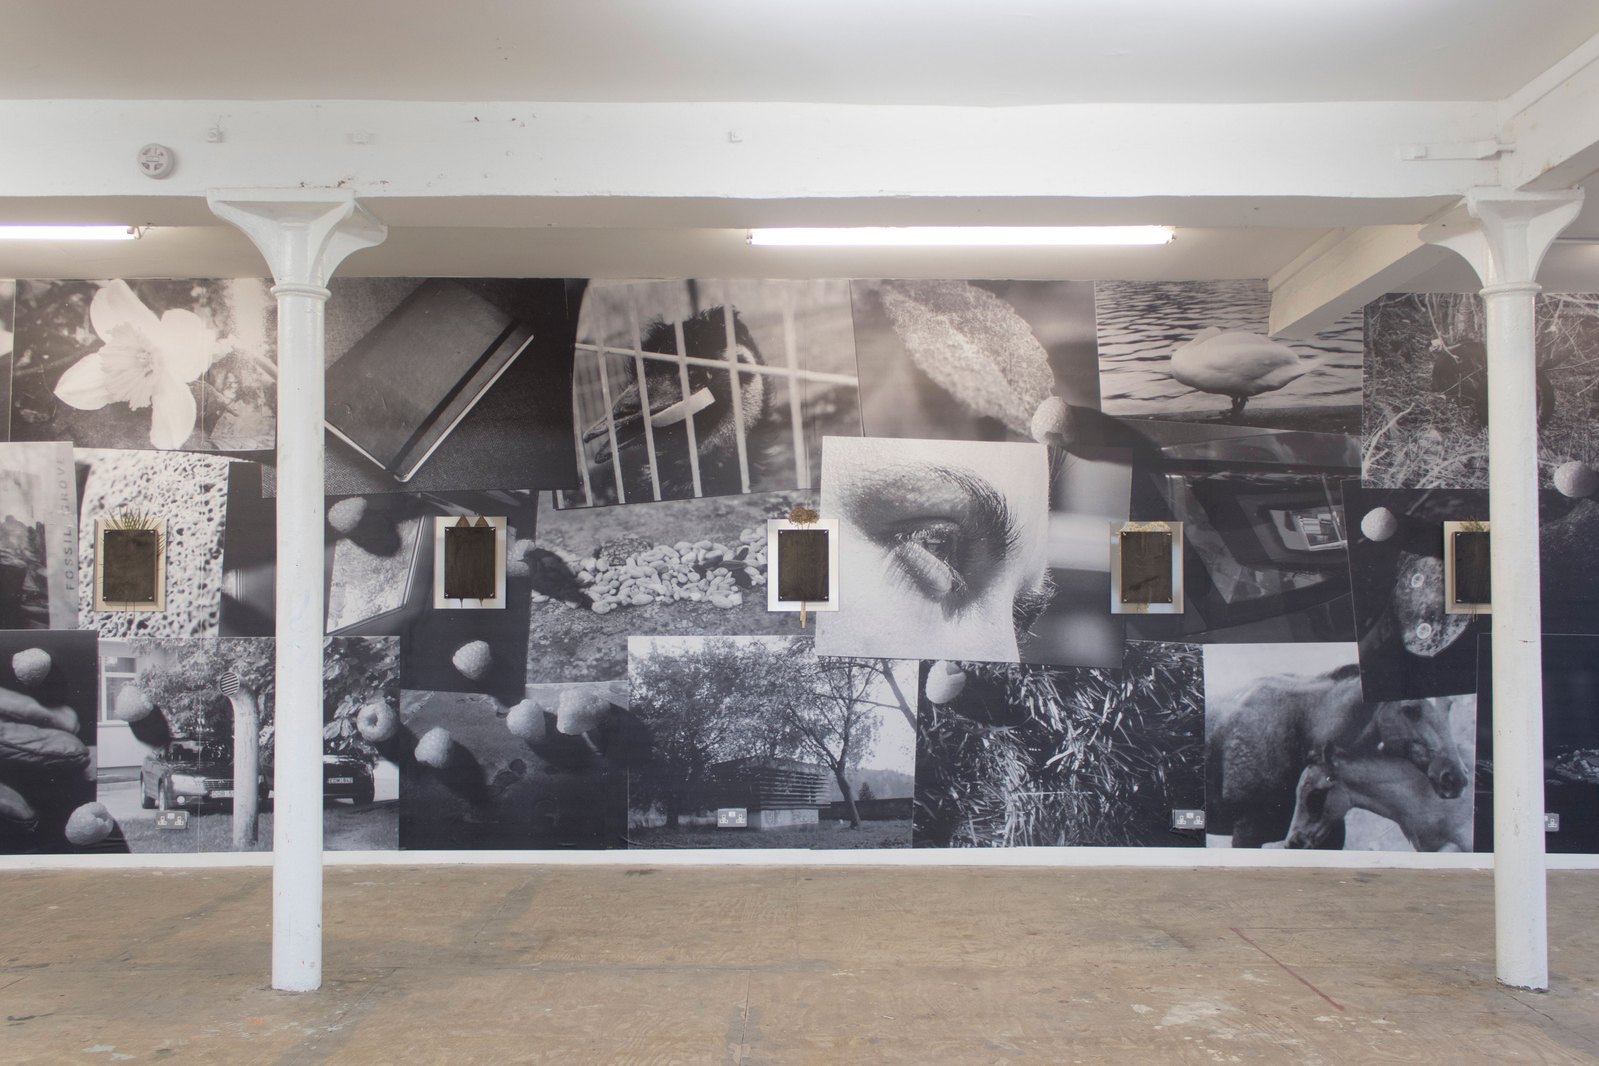 Room with white pillars, the floor is plywood. Along the length of the wall is a black and white floor to ceiling print containing multiple photographic images and large raspberries. Rectangular metal and wood sculptures hang on the wall. Jamie Kane